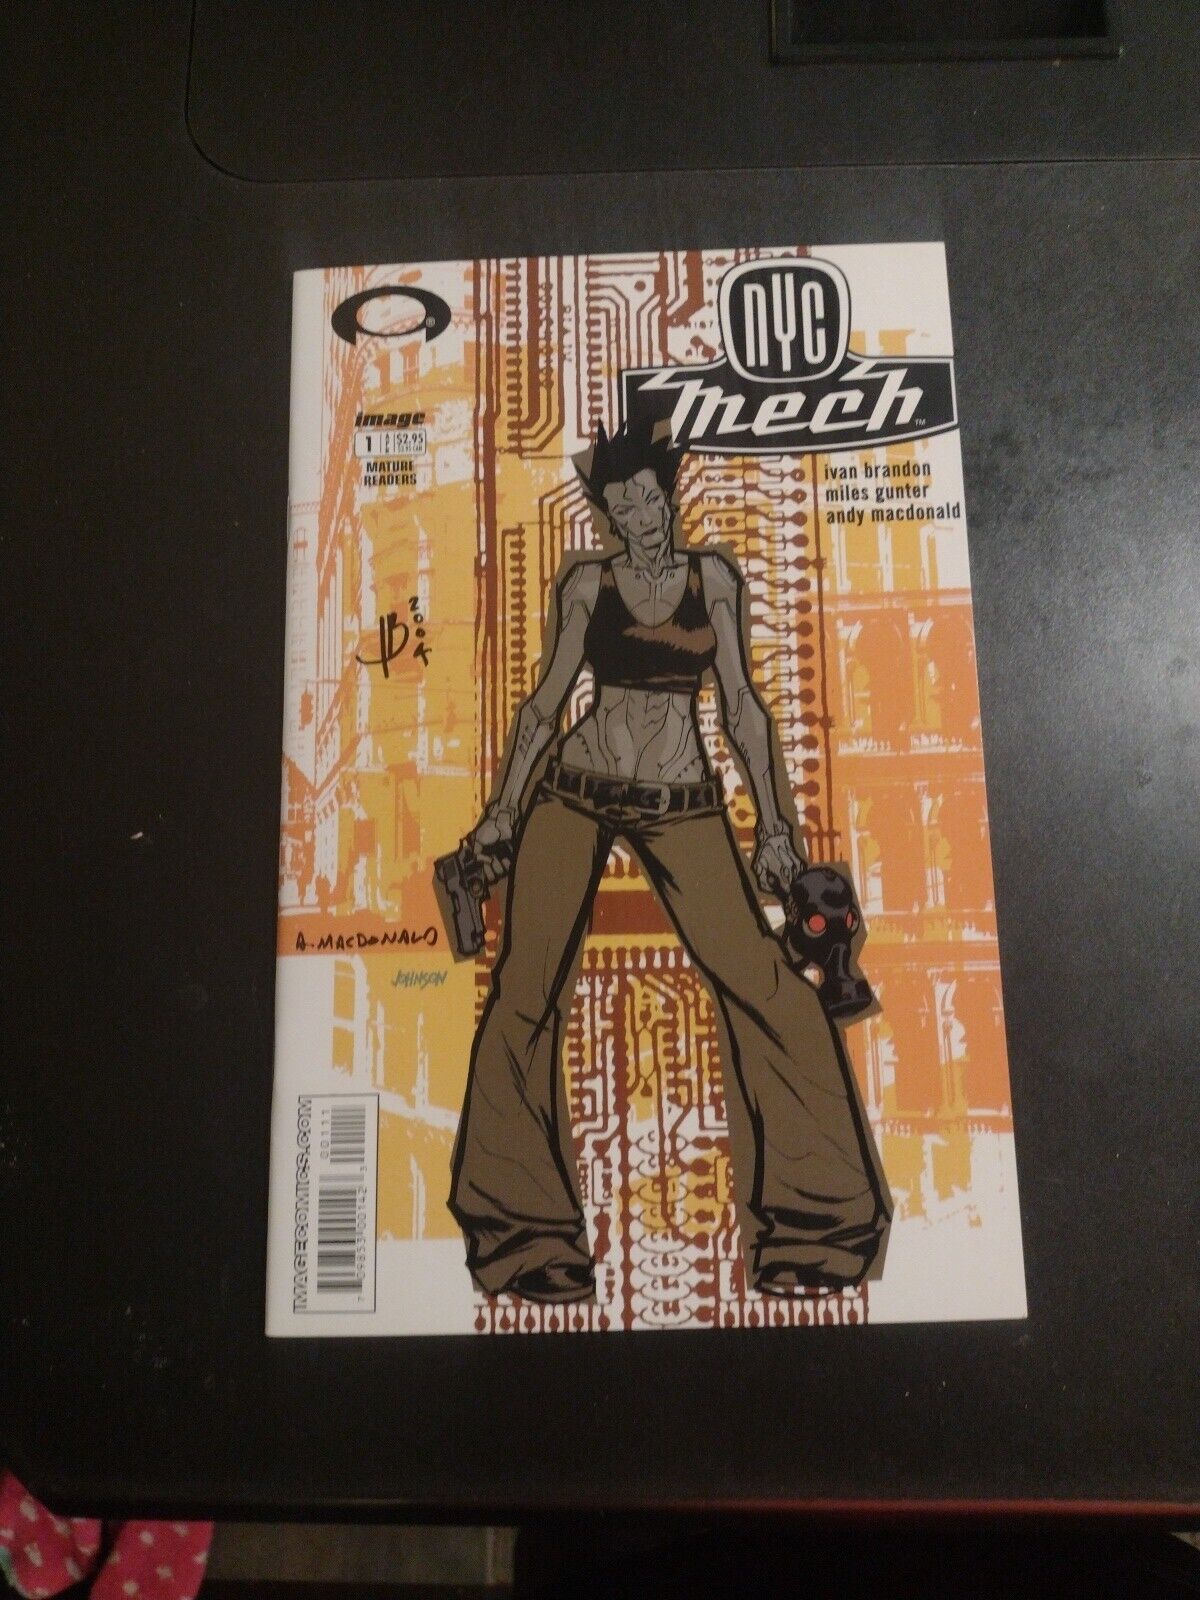 NYC Mech #1 VF Signed Ivan Brandon & Andy Macdonald - Will Combine Shipping